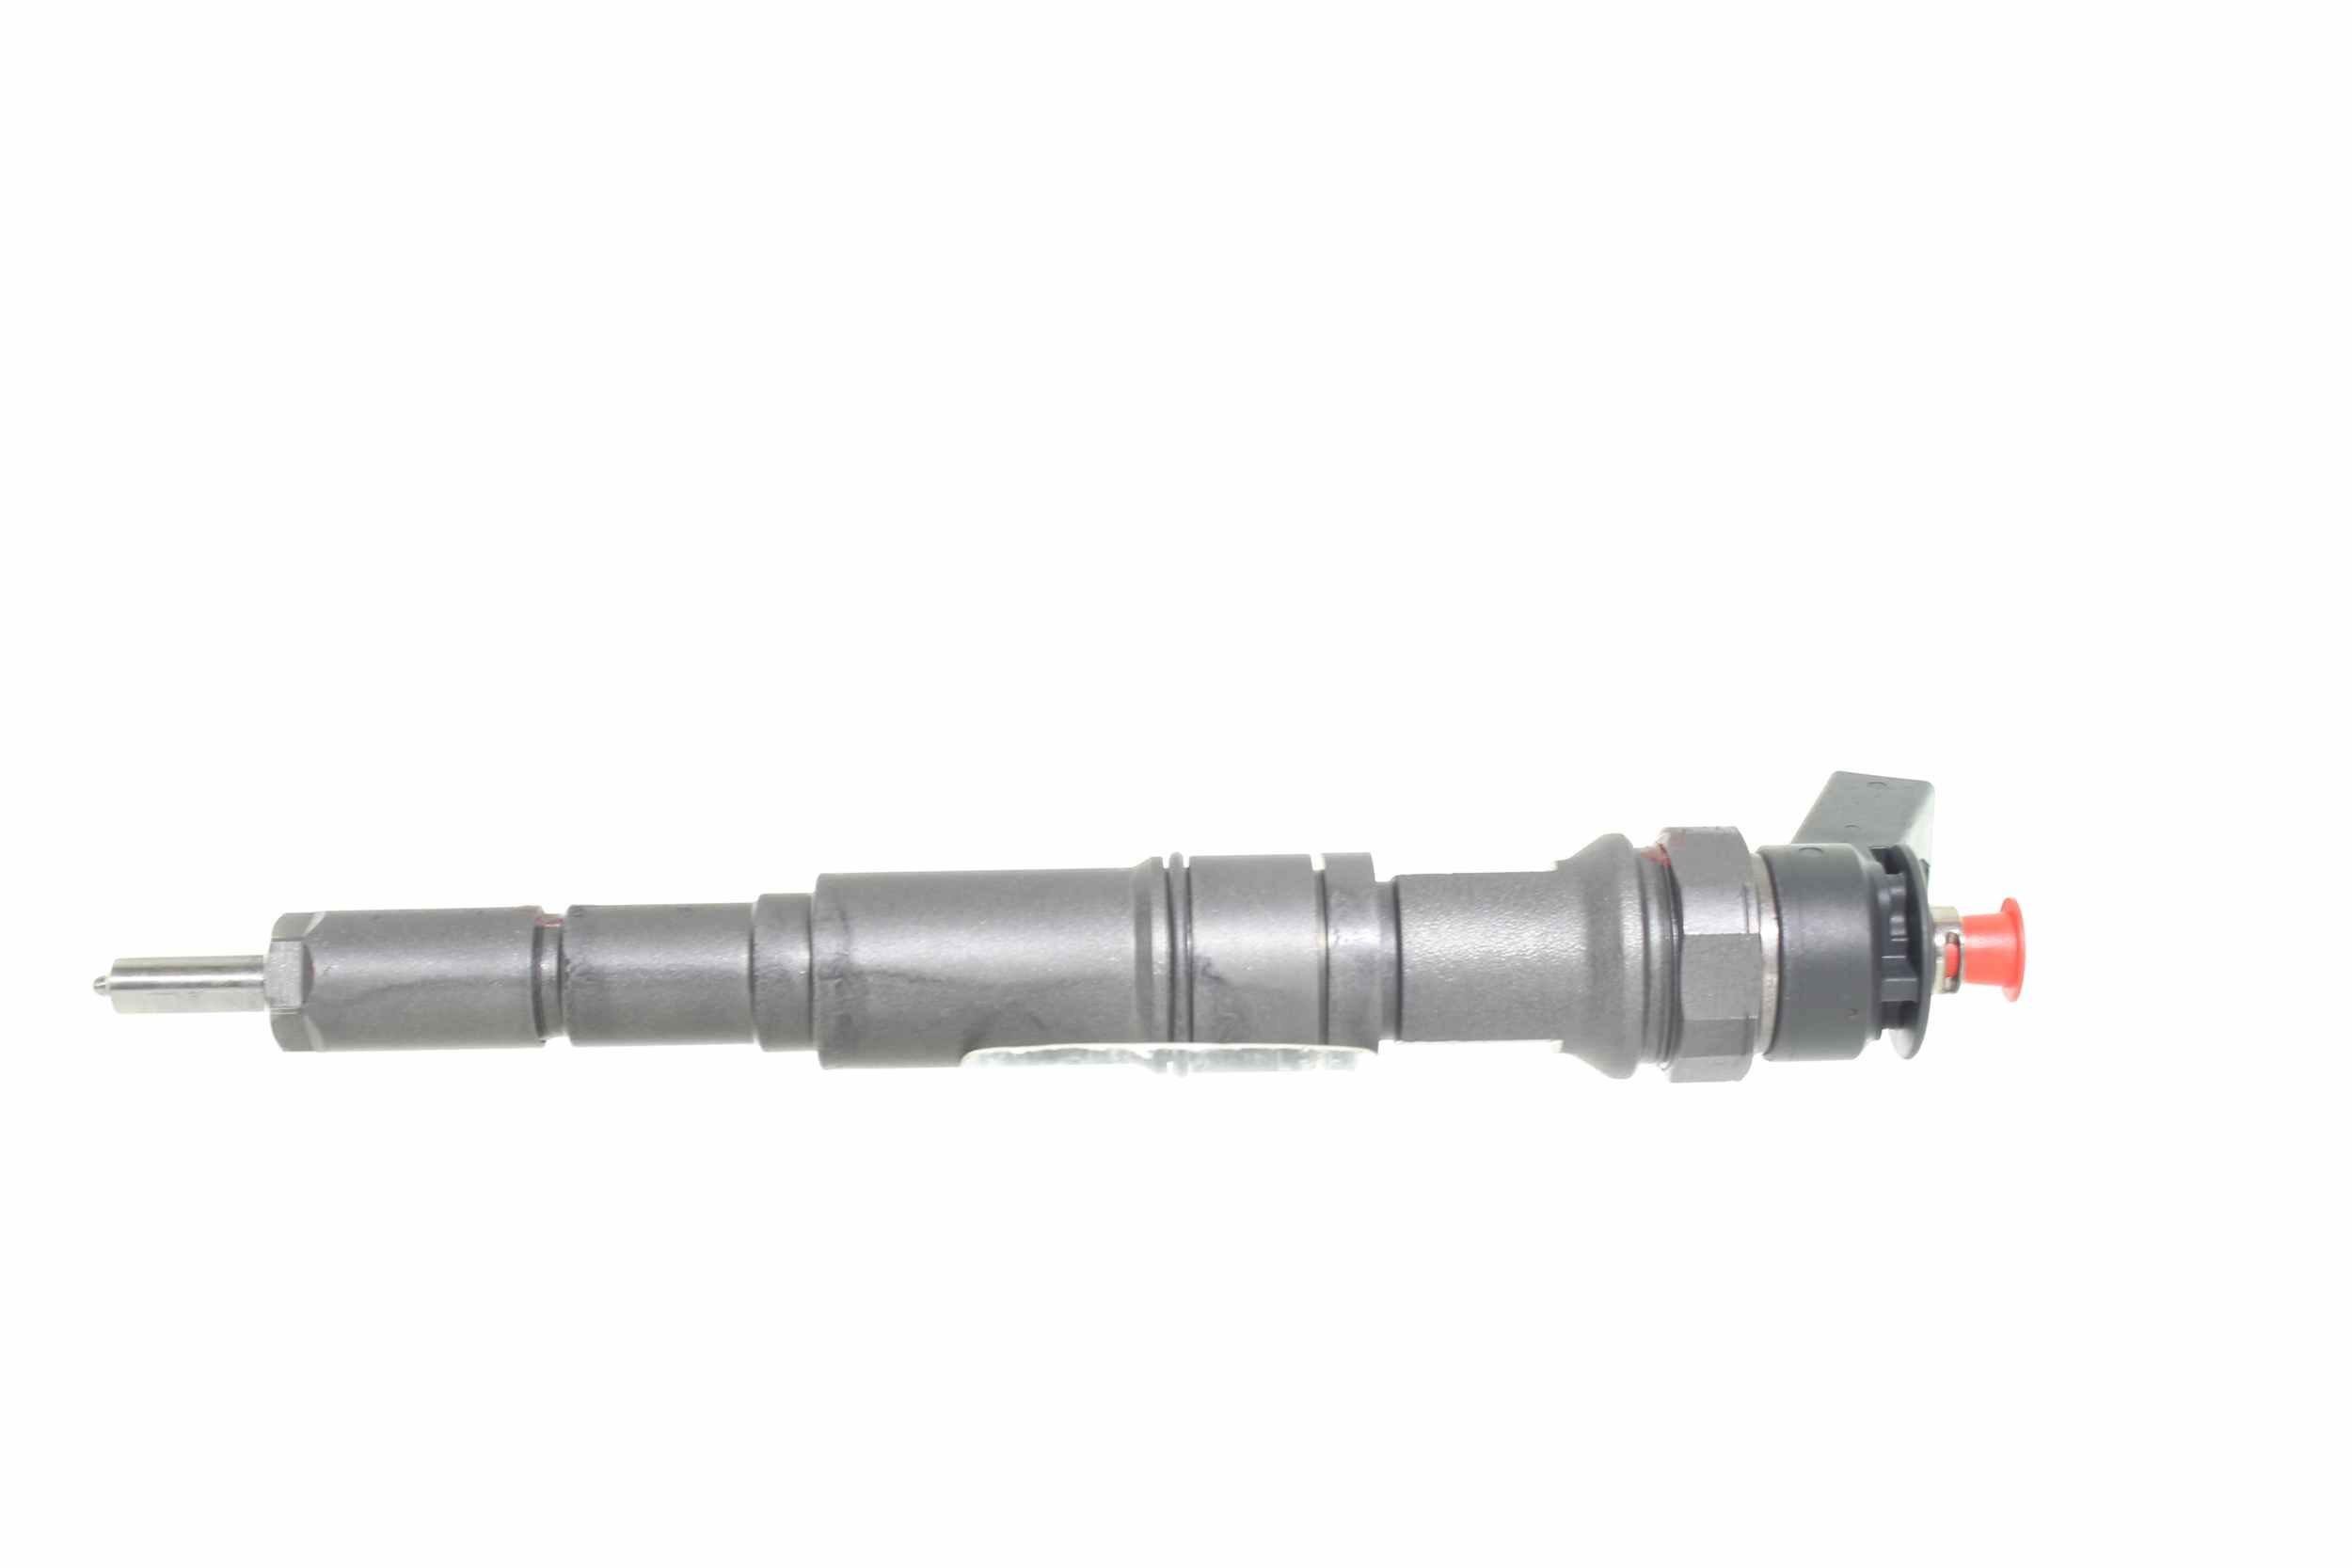 ALANKO 970025 Injector Nozzle Common Rail (CR), with seal